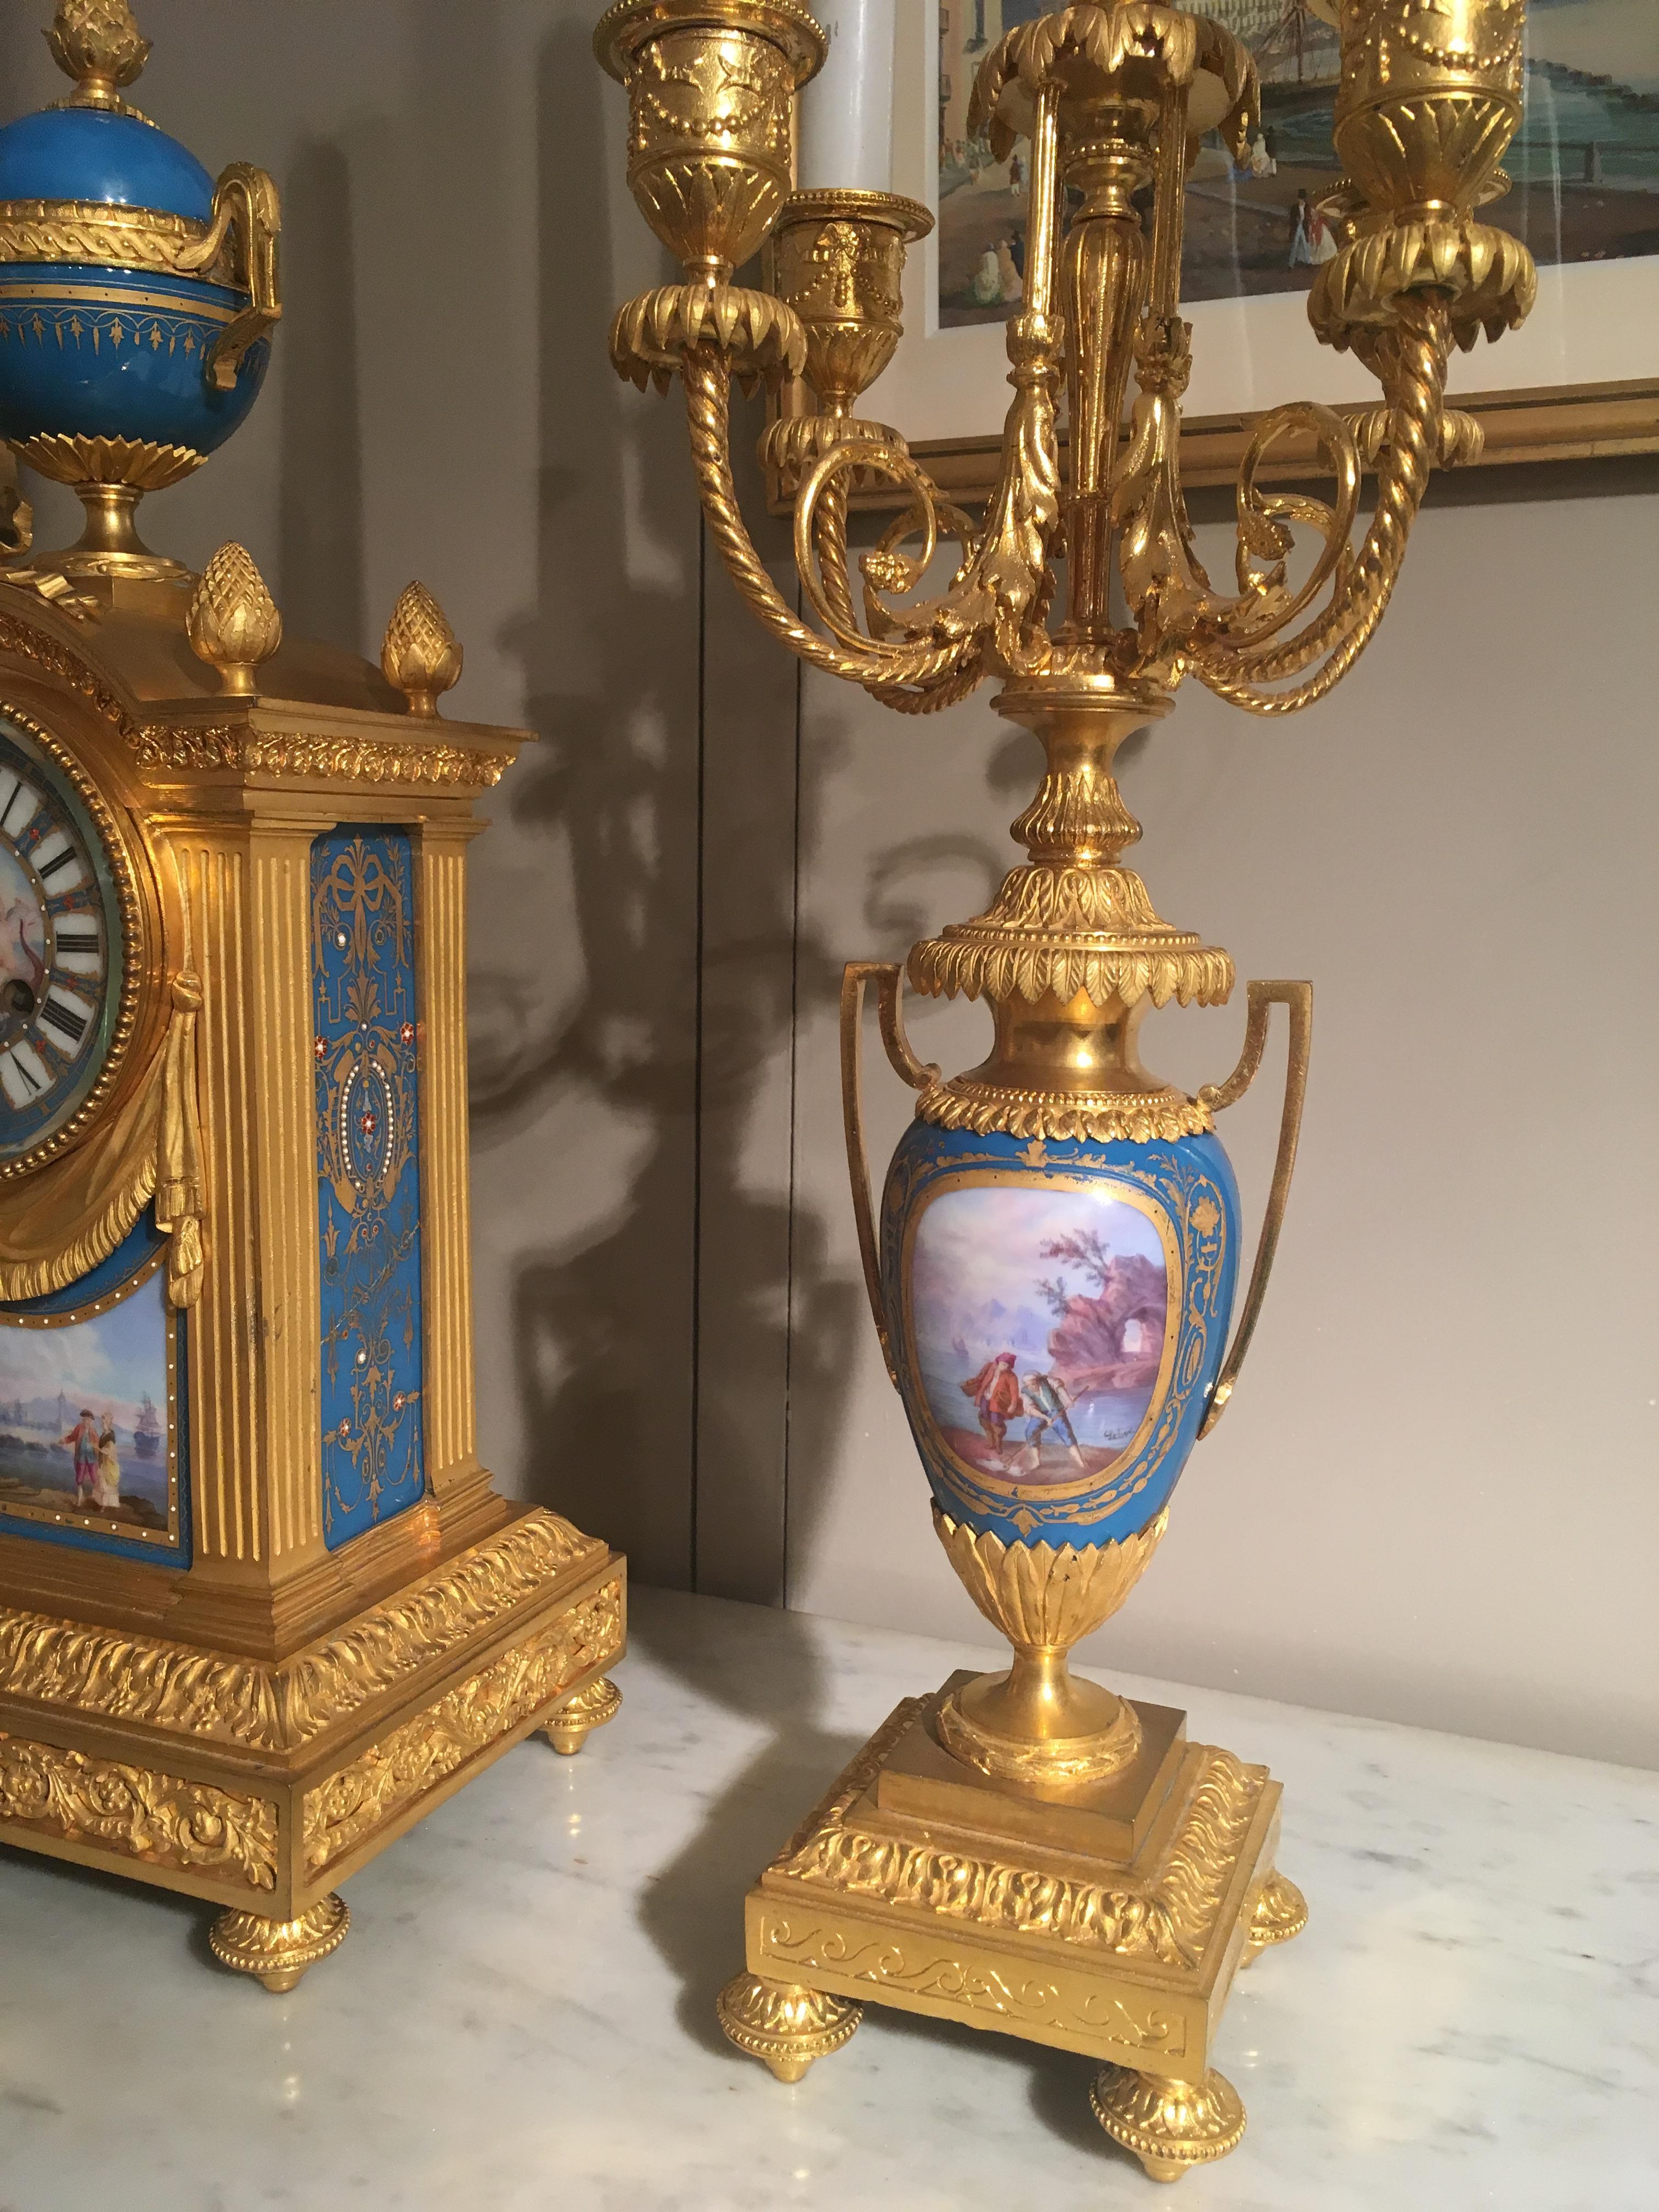 French Mantel Clock and Candelabra of Gilt Bronze and Blue ‘Sèvres’ Porcelain In Good Condition For Sale In London, GB